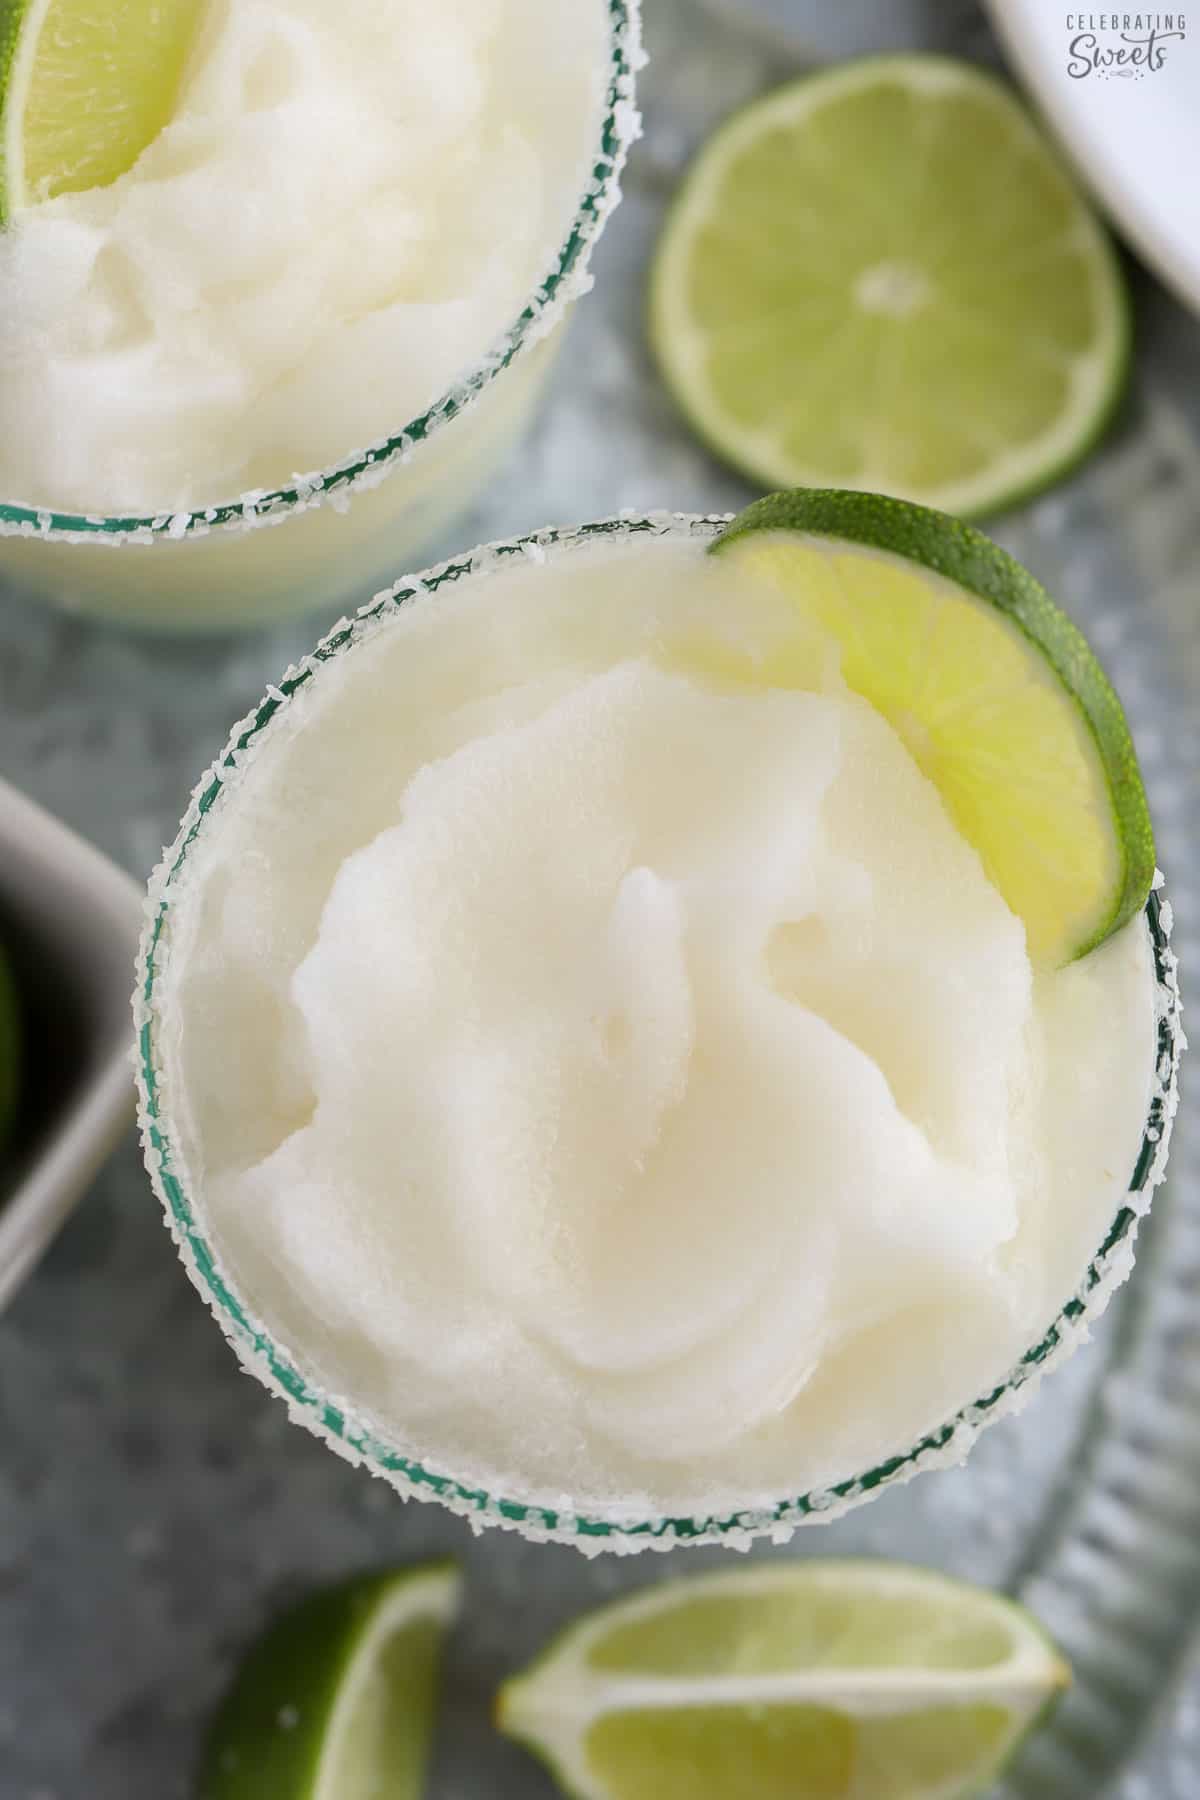 Frozen margarita in a glass garnished with lime.